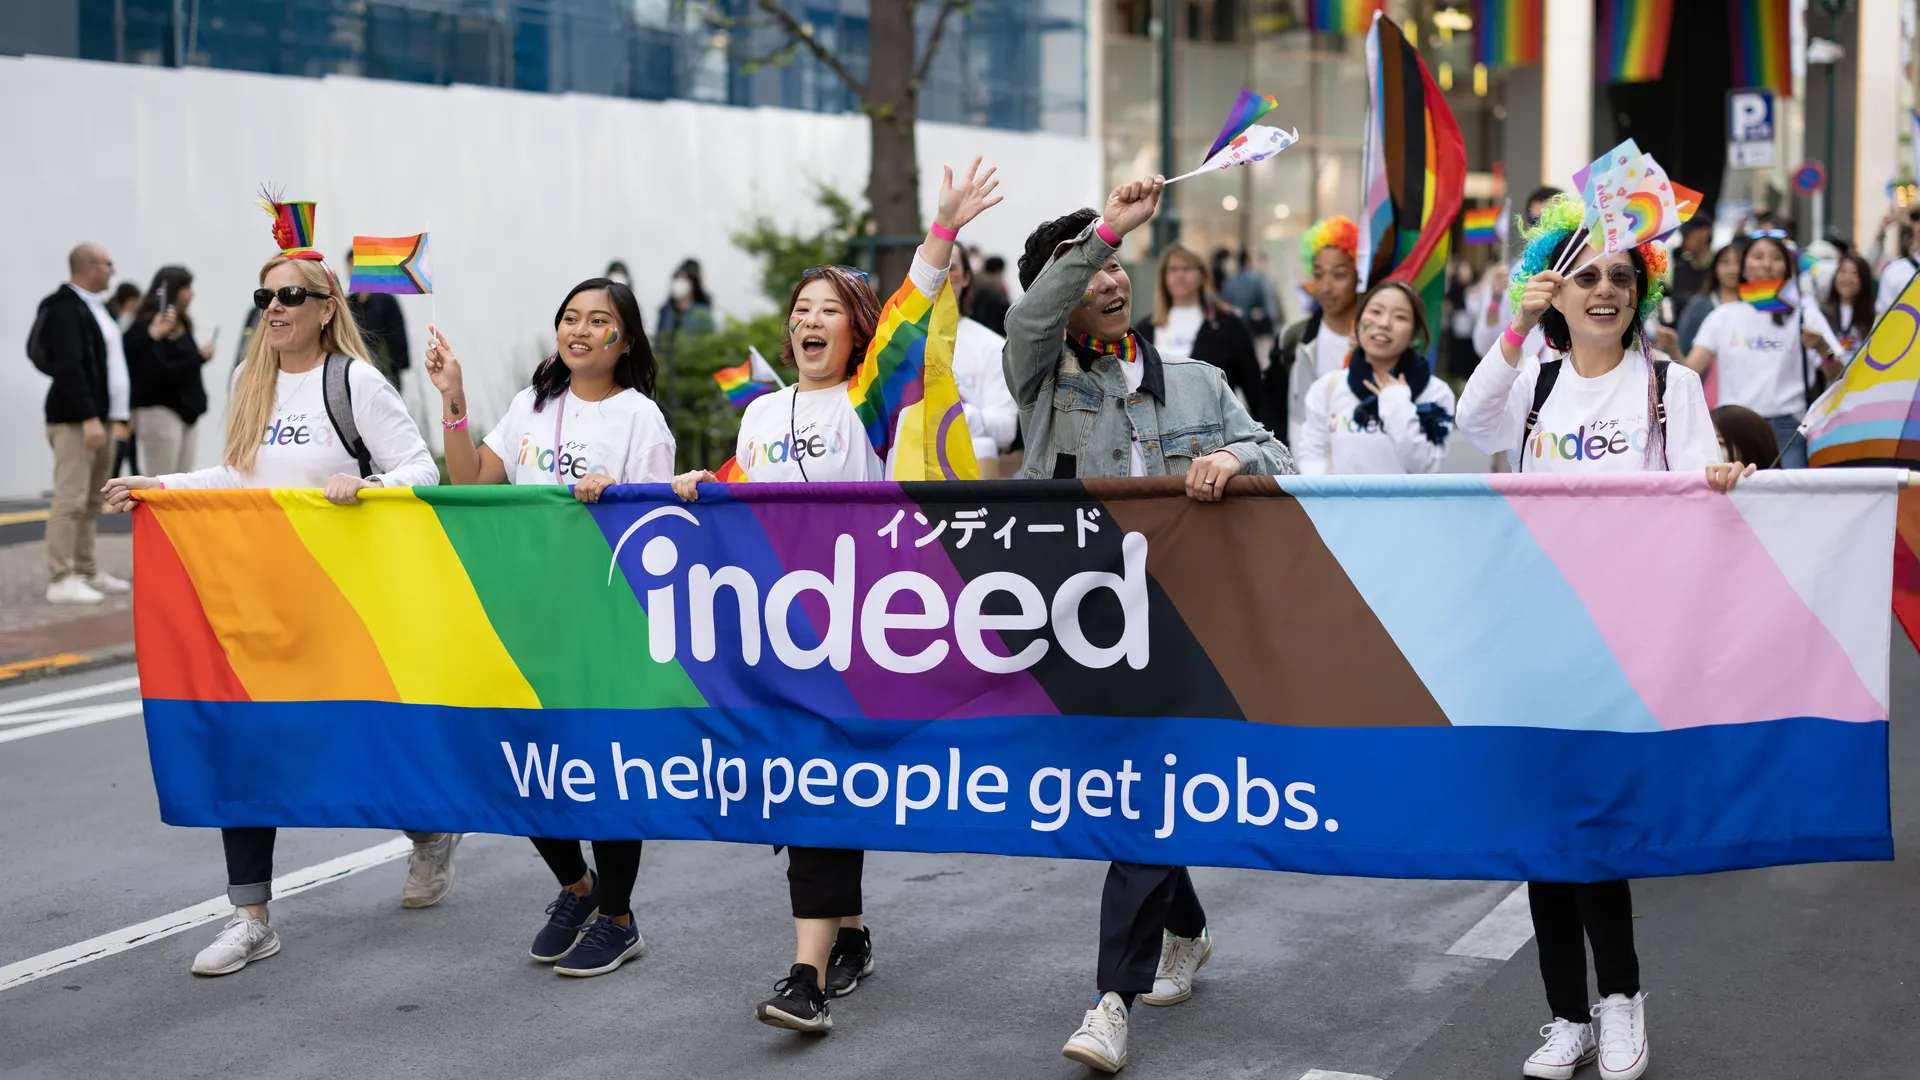 Indeed offers $10,000 to transgender employees seeking to relocate